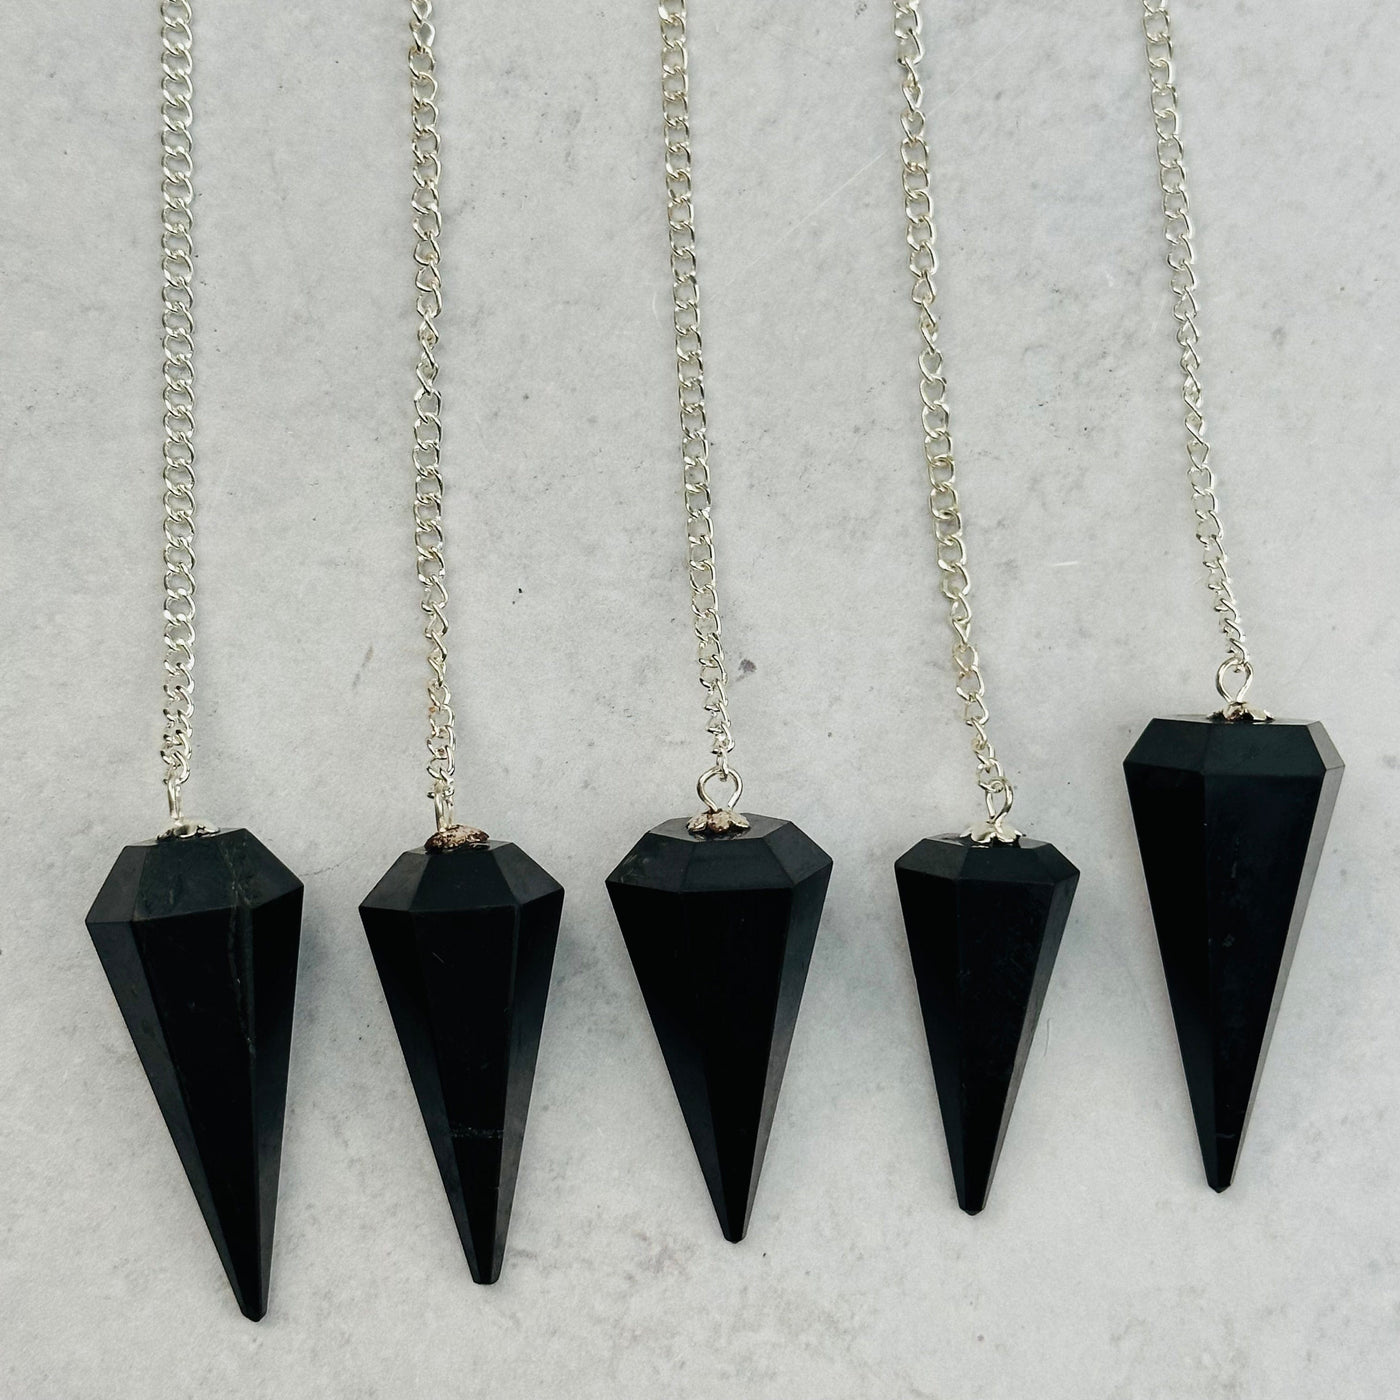 multiple Shungite Pendulums displayed to show the differences in the sizes 